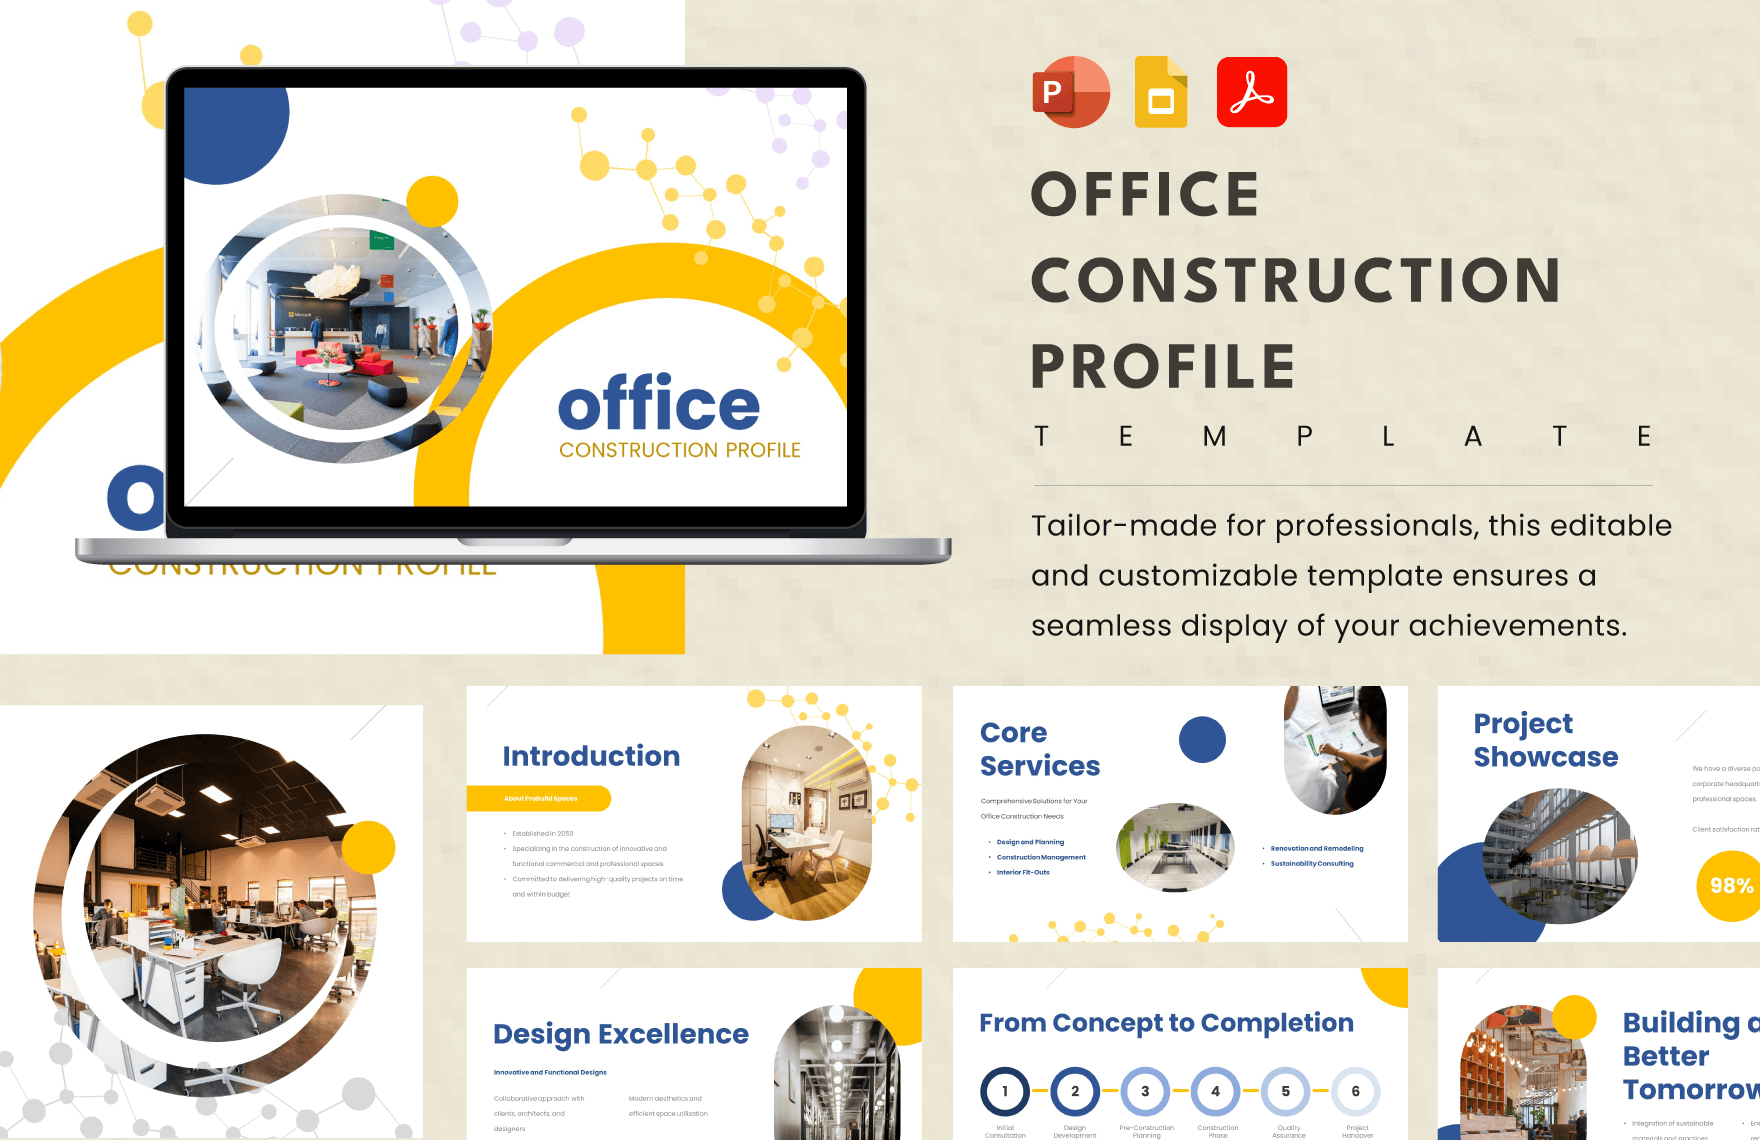 Office Construction Profile Template